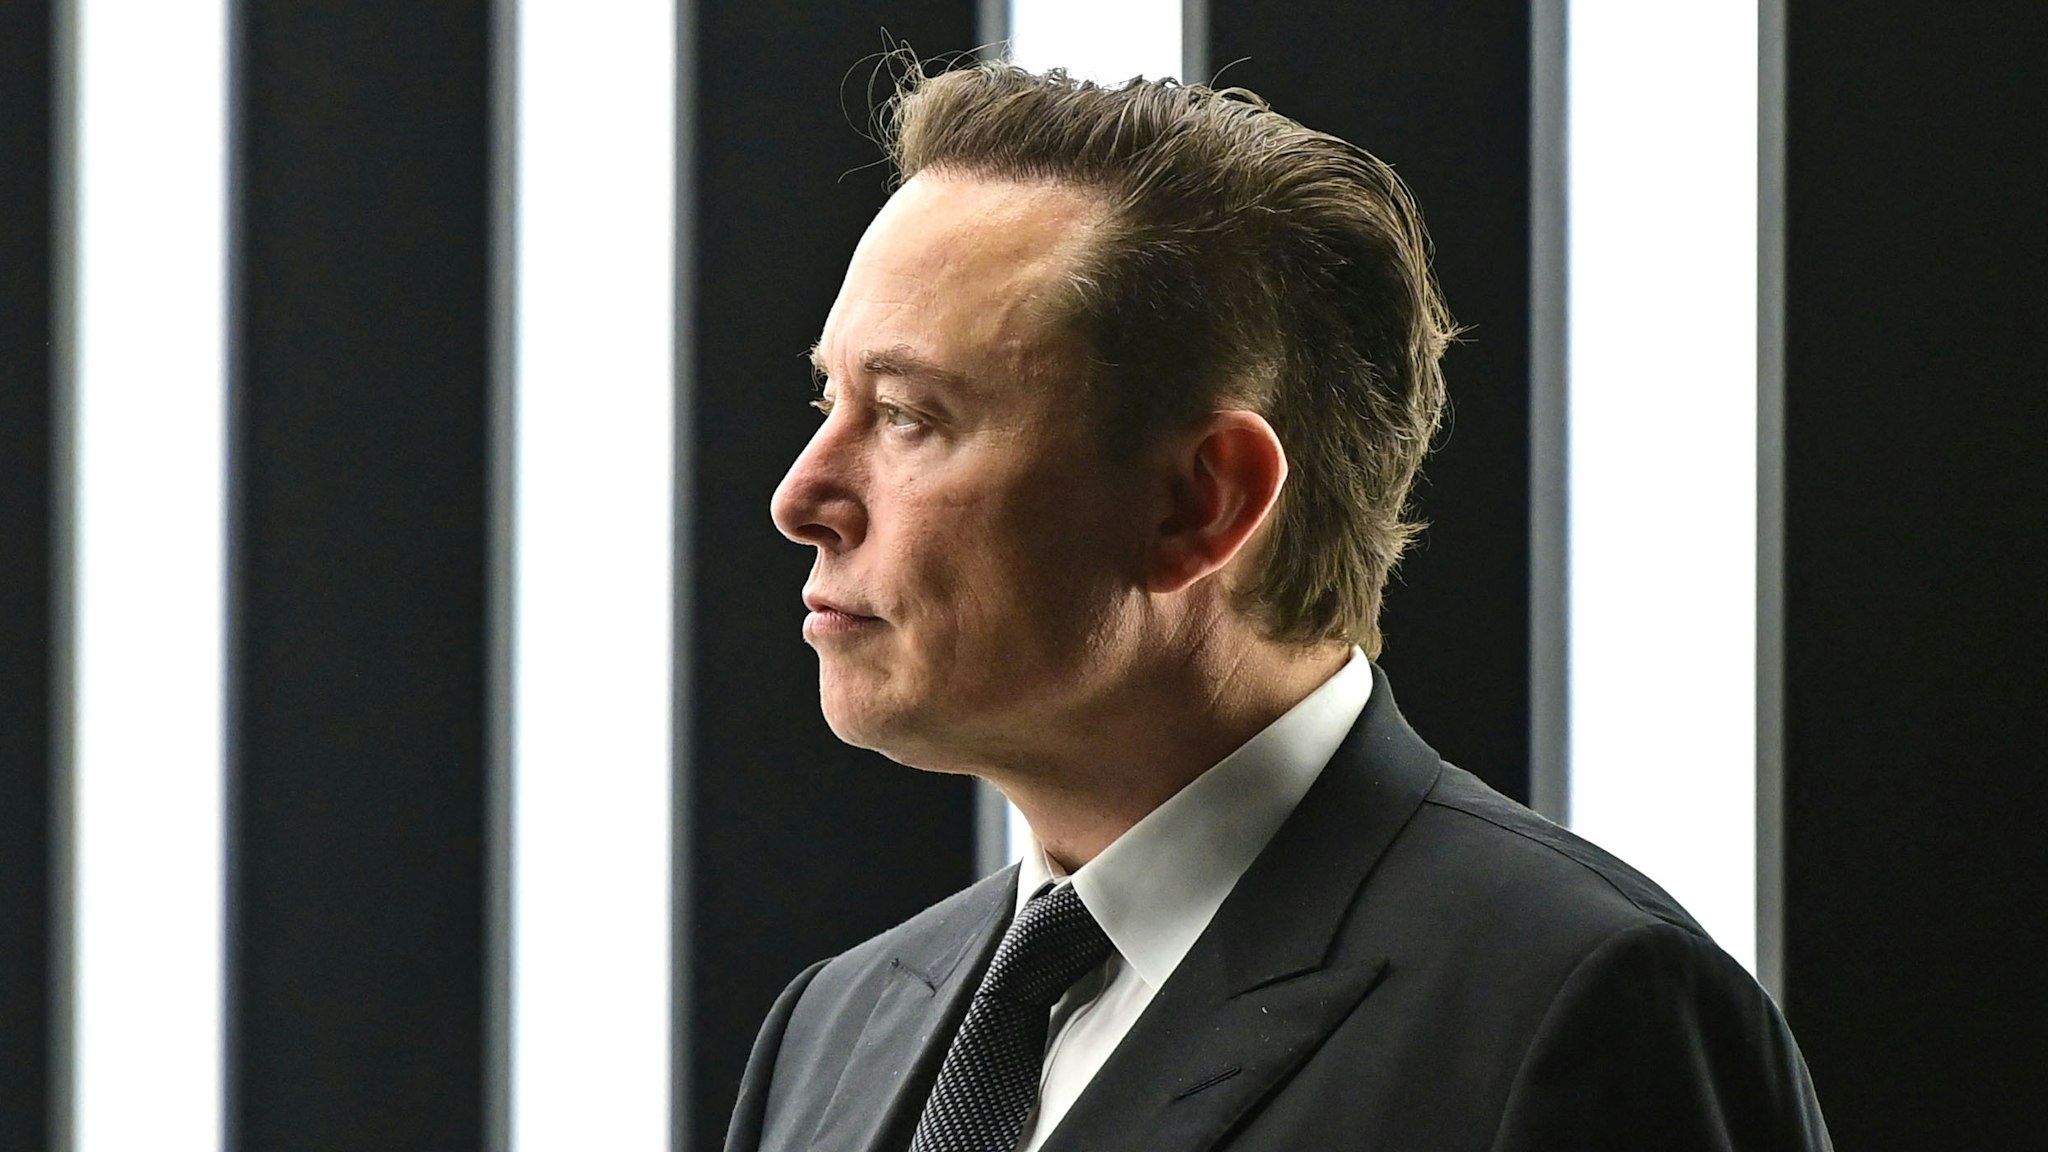 Tesla CEO Elon Musk is pictured as he attends the start of the production at Tesla's "Gigafactory" on March 22, 2022 in Gruenheide, southeast of Berlin. - US electric car pioneer Tesla received the go-ahead for its "gigafactory" in Germany on March 4, 2022, paving the way for production to begin shortly after an approval process dogged by delays and setbacks.